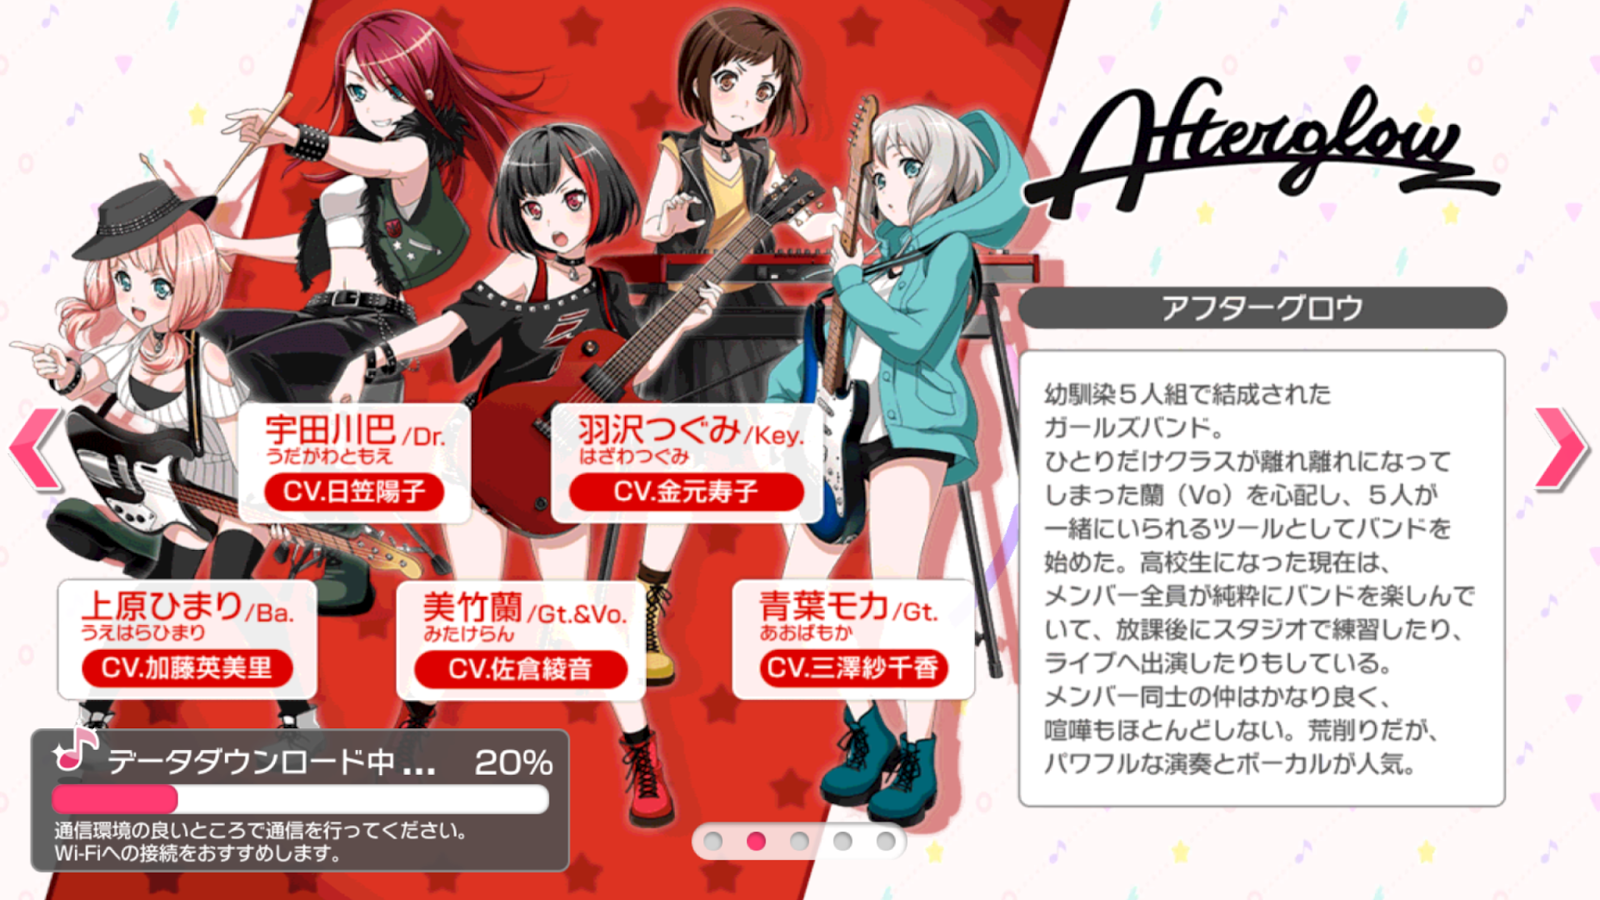 Smartphone Game 'BanG Dream! Girls Band Party!' Starts Another